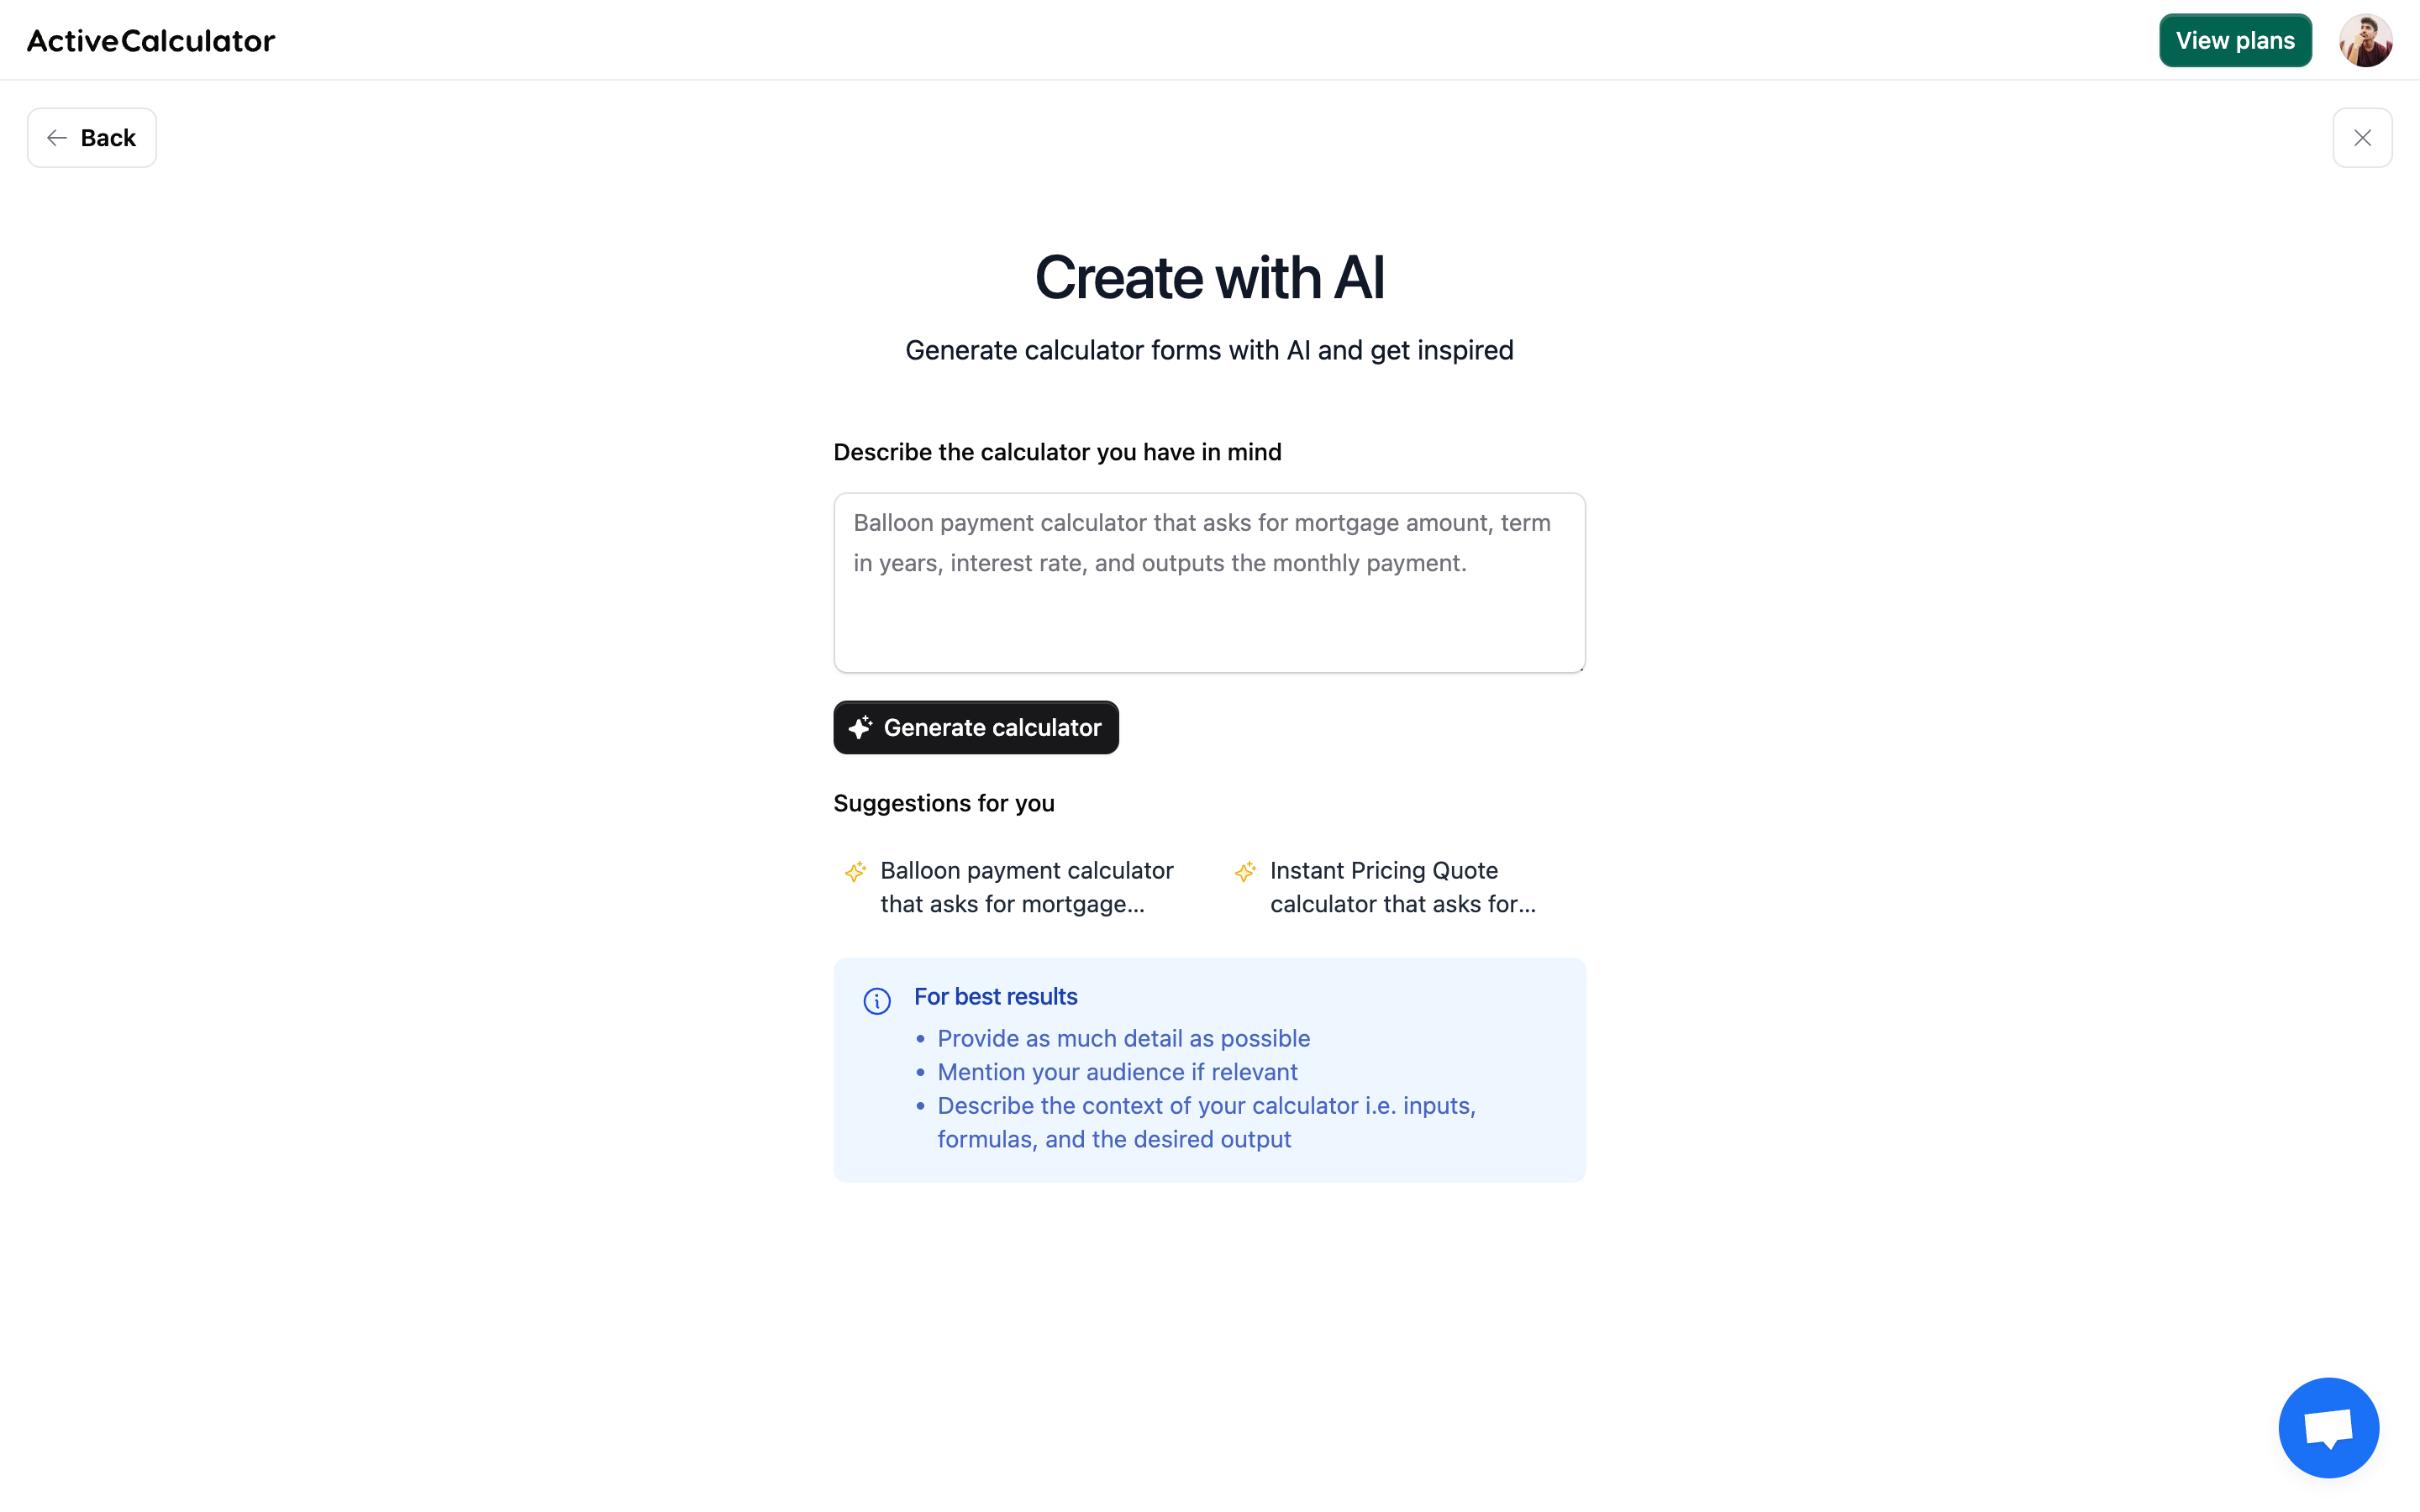 Introducing Simplified Pricing and AI-Powered Calculator Creation